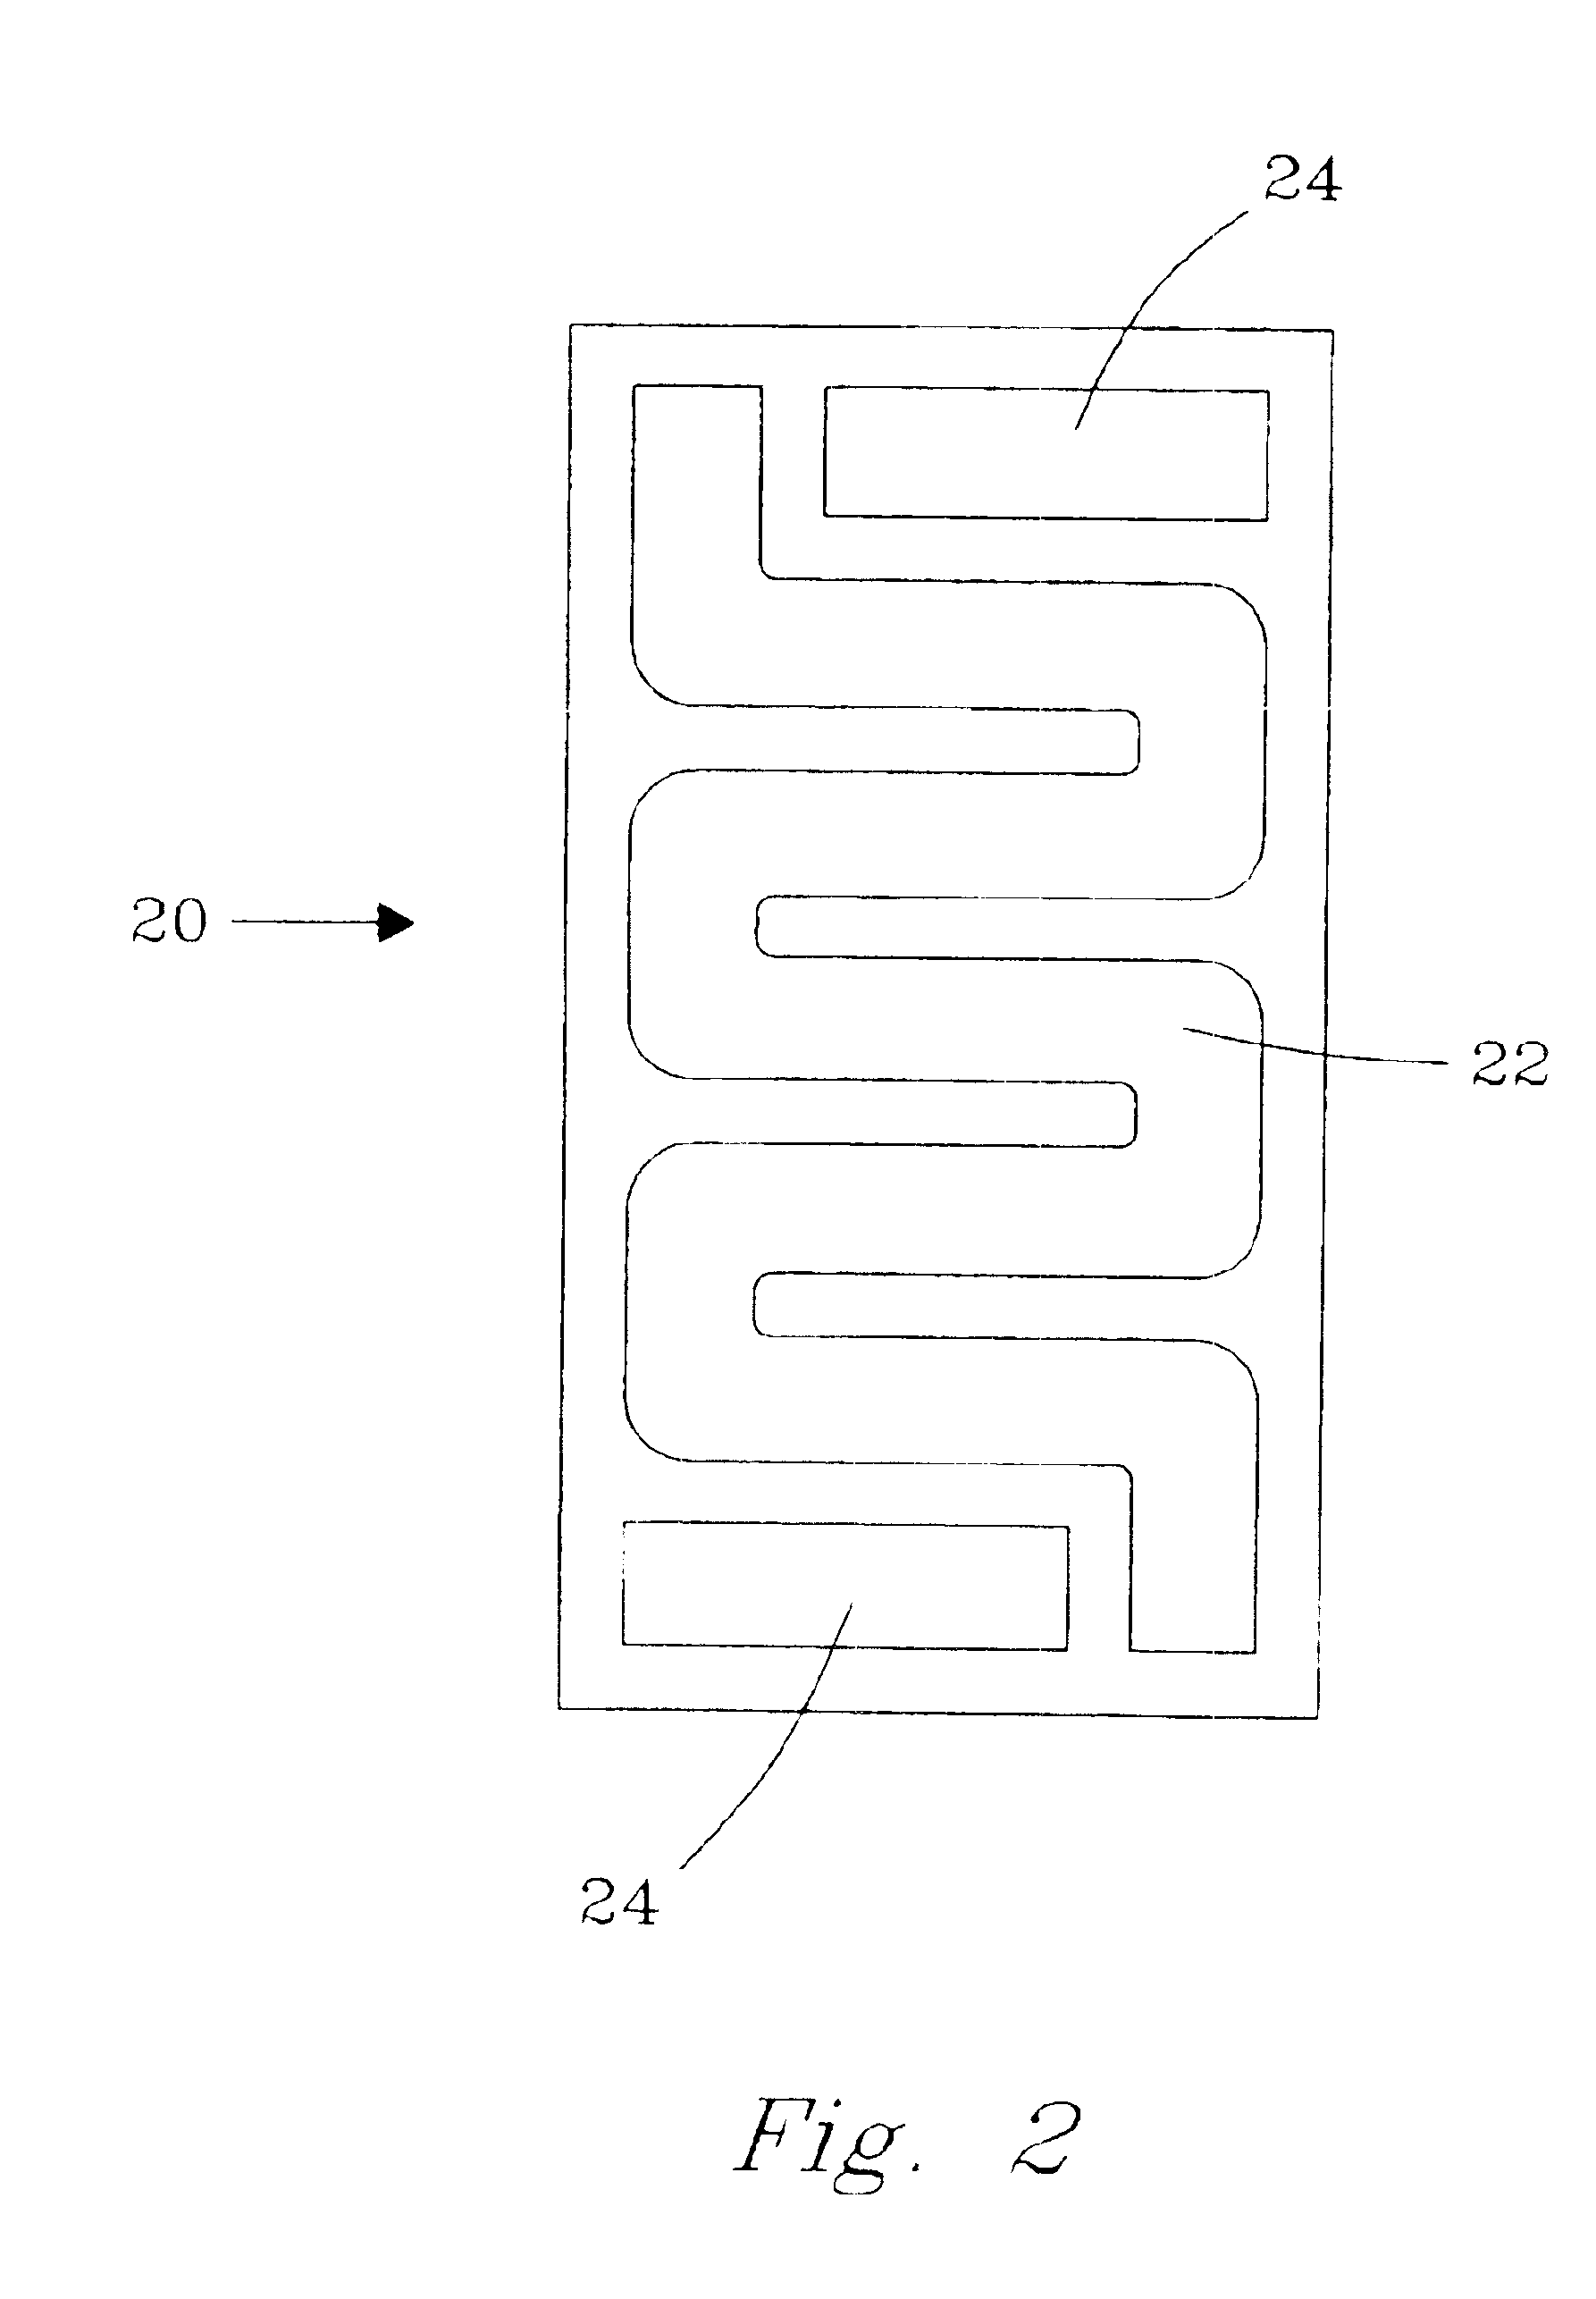 Apparatus for thermal swing adsorption and thermally-enhanced pressure swing adsorption